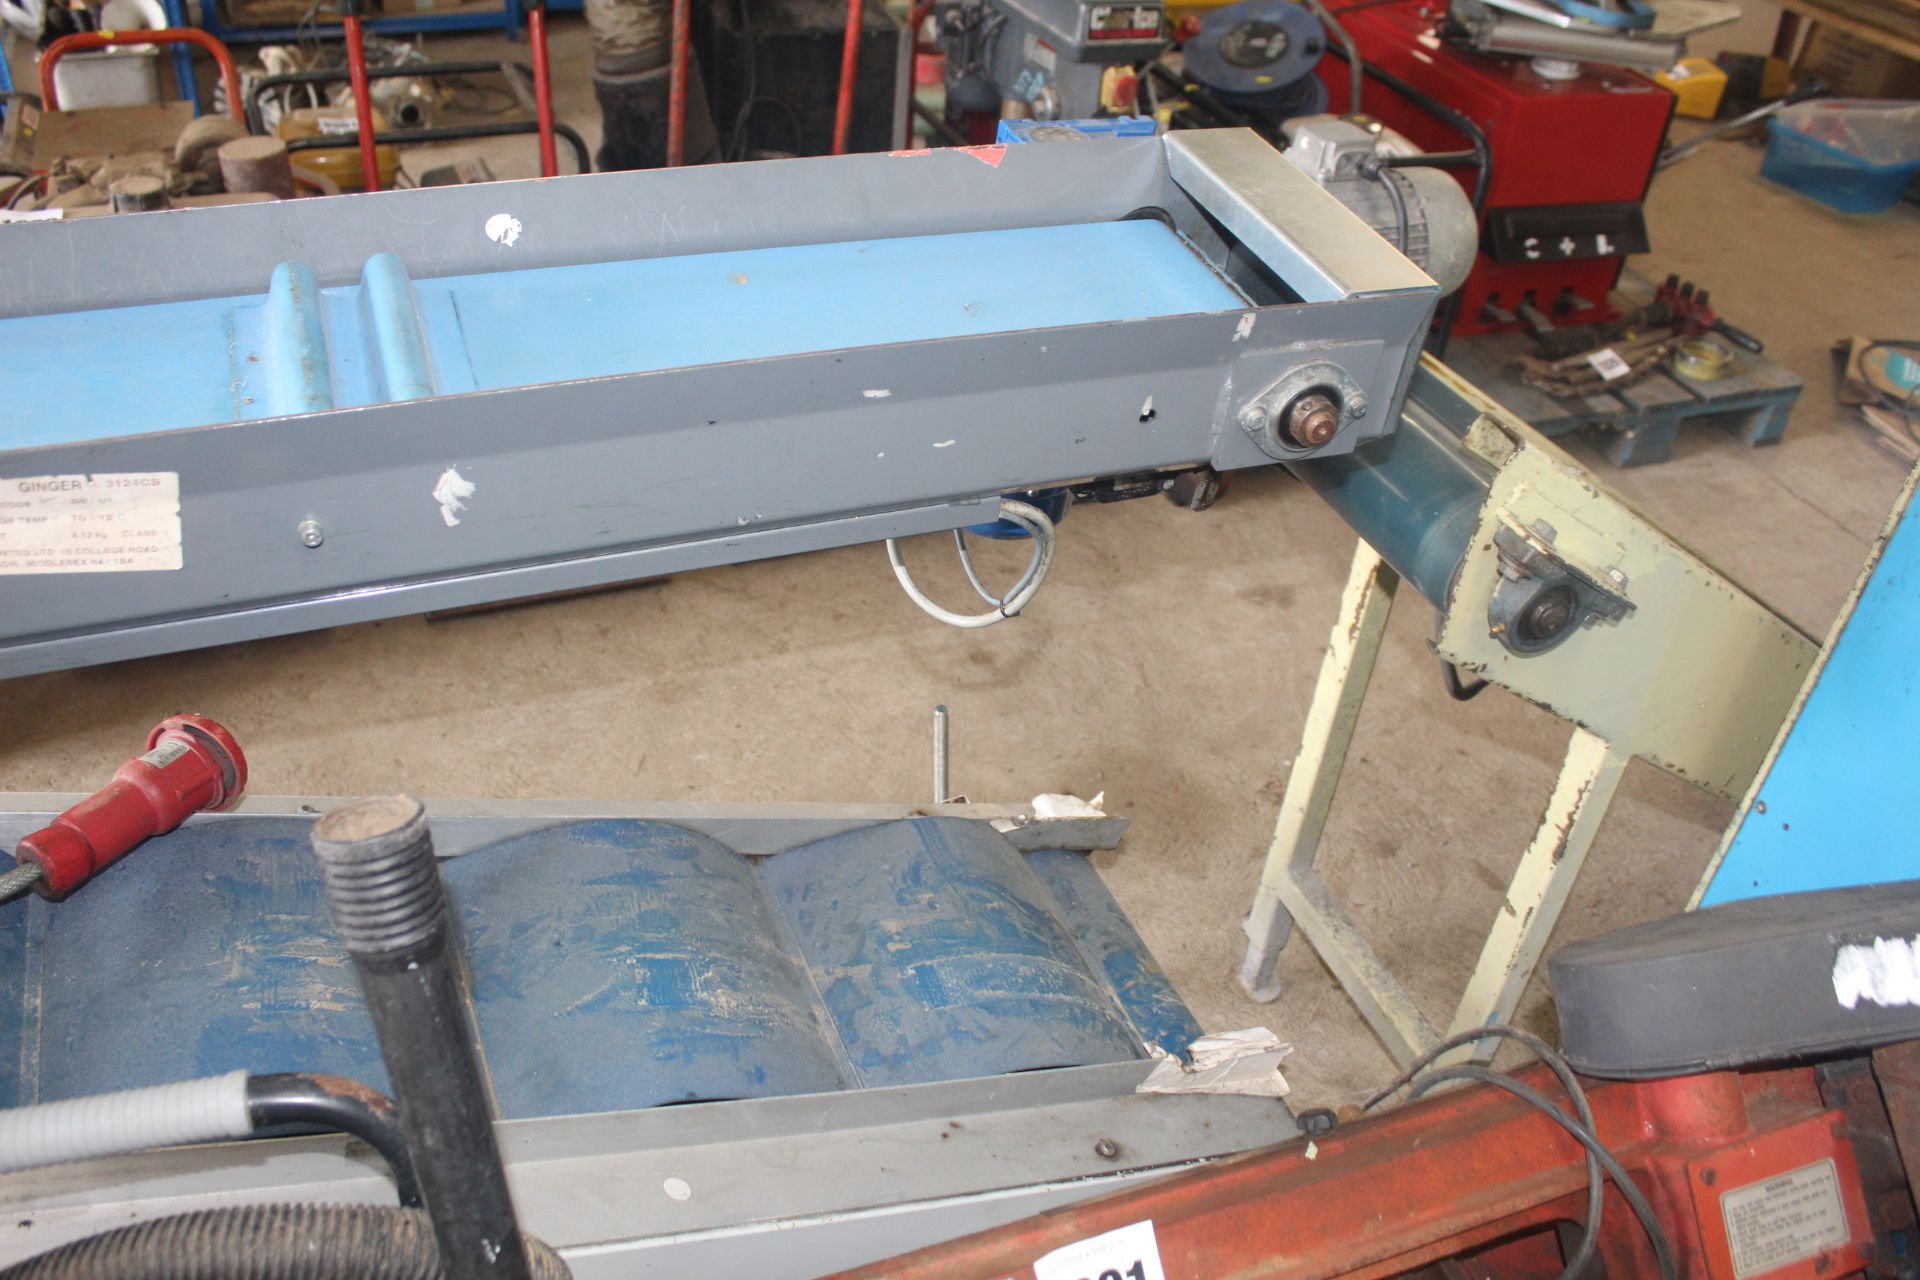 Sorma KB GX 140 produce netting machine. With label printer and output elevator. - Image 15 of 28